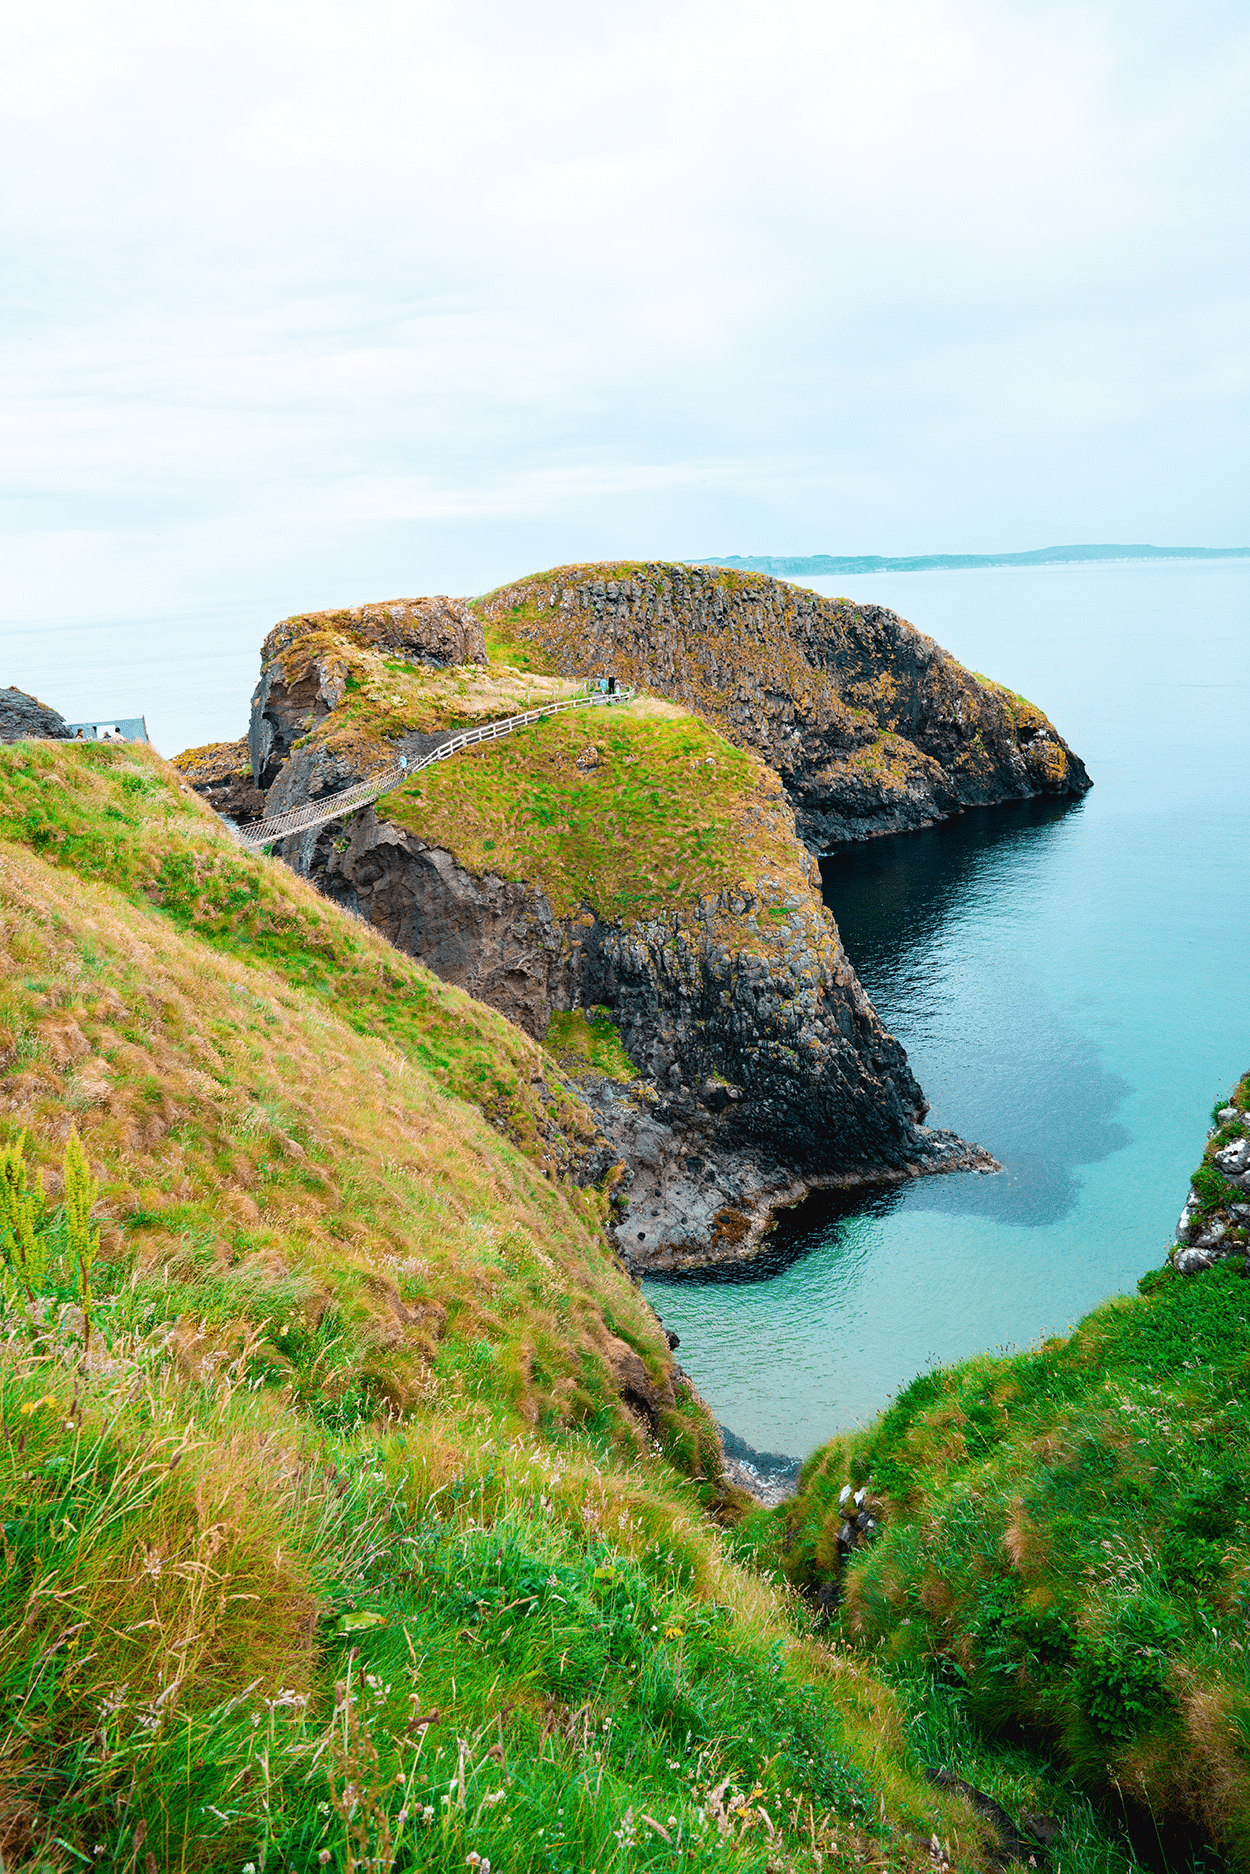 Hike the trail to Carrick-A-Rede even if you don't walk across the rope bridge- photo by Keryn Means editor of Twist Travel Magazine